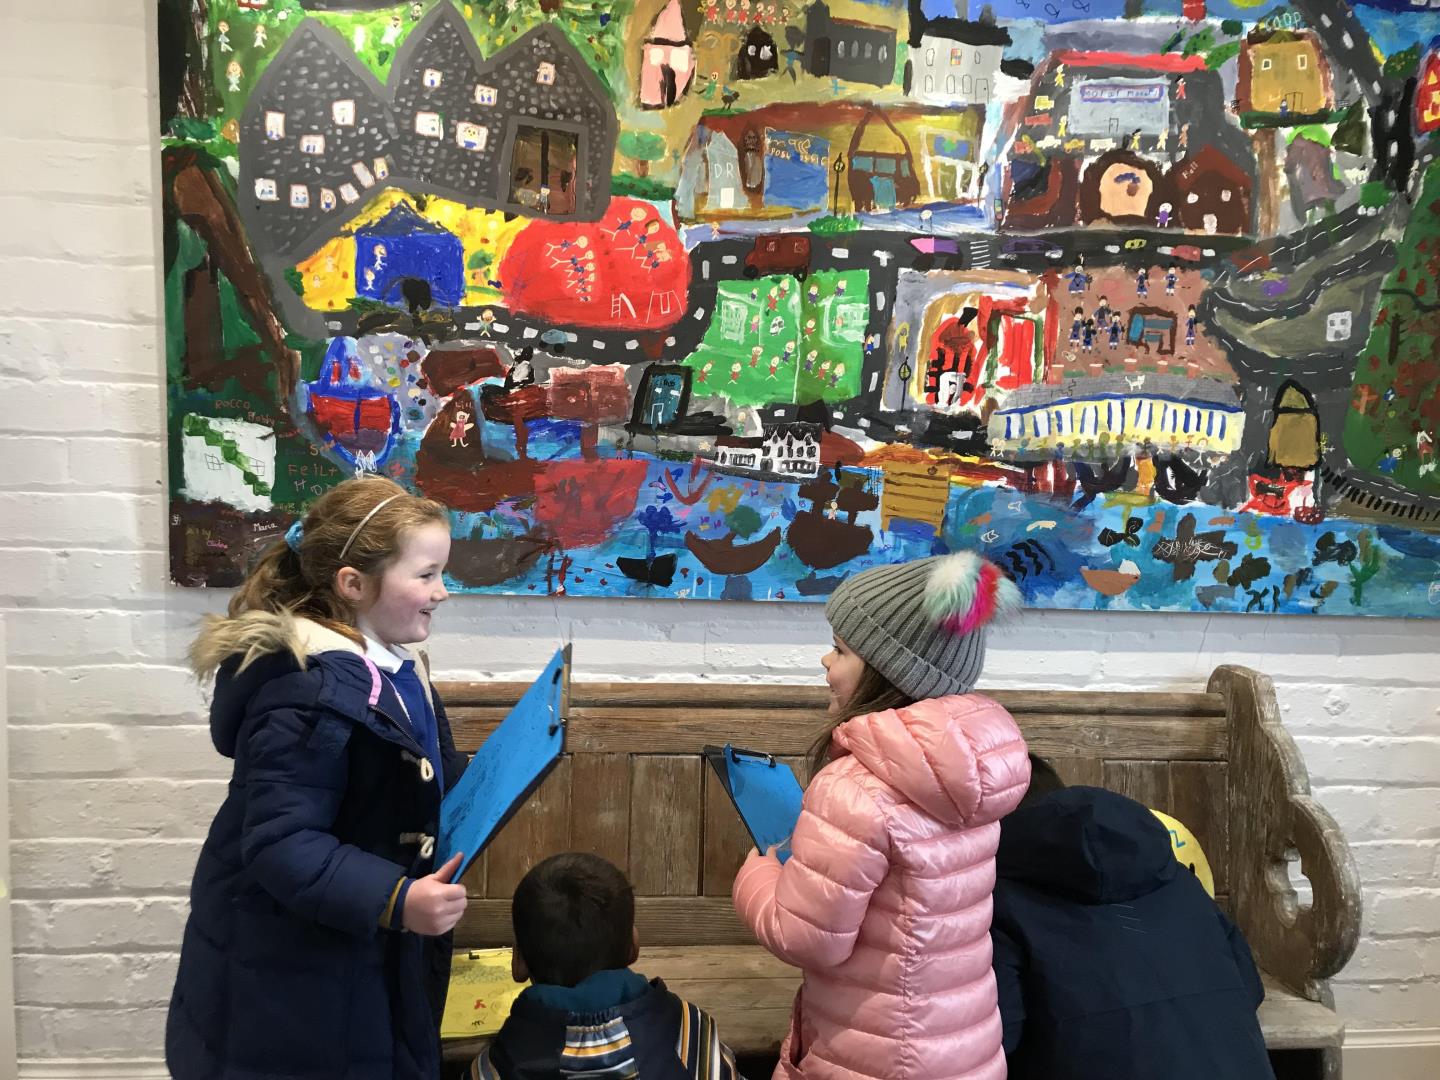 Kaleidoscope community art exhibit: Kyle Primary School pupils stand with their creation 'Our Kyle,' a colourful acrylic painting of their vision of their hometown.